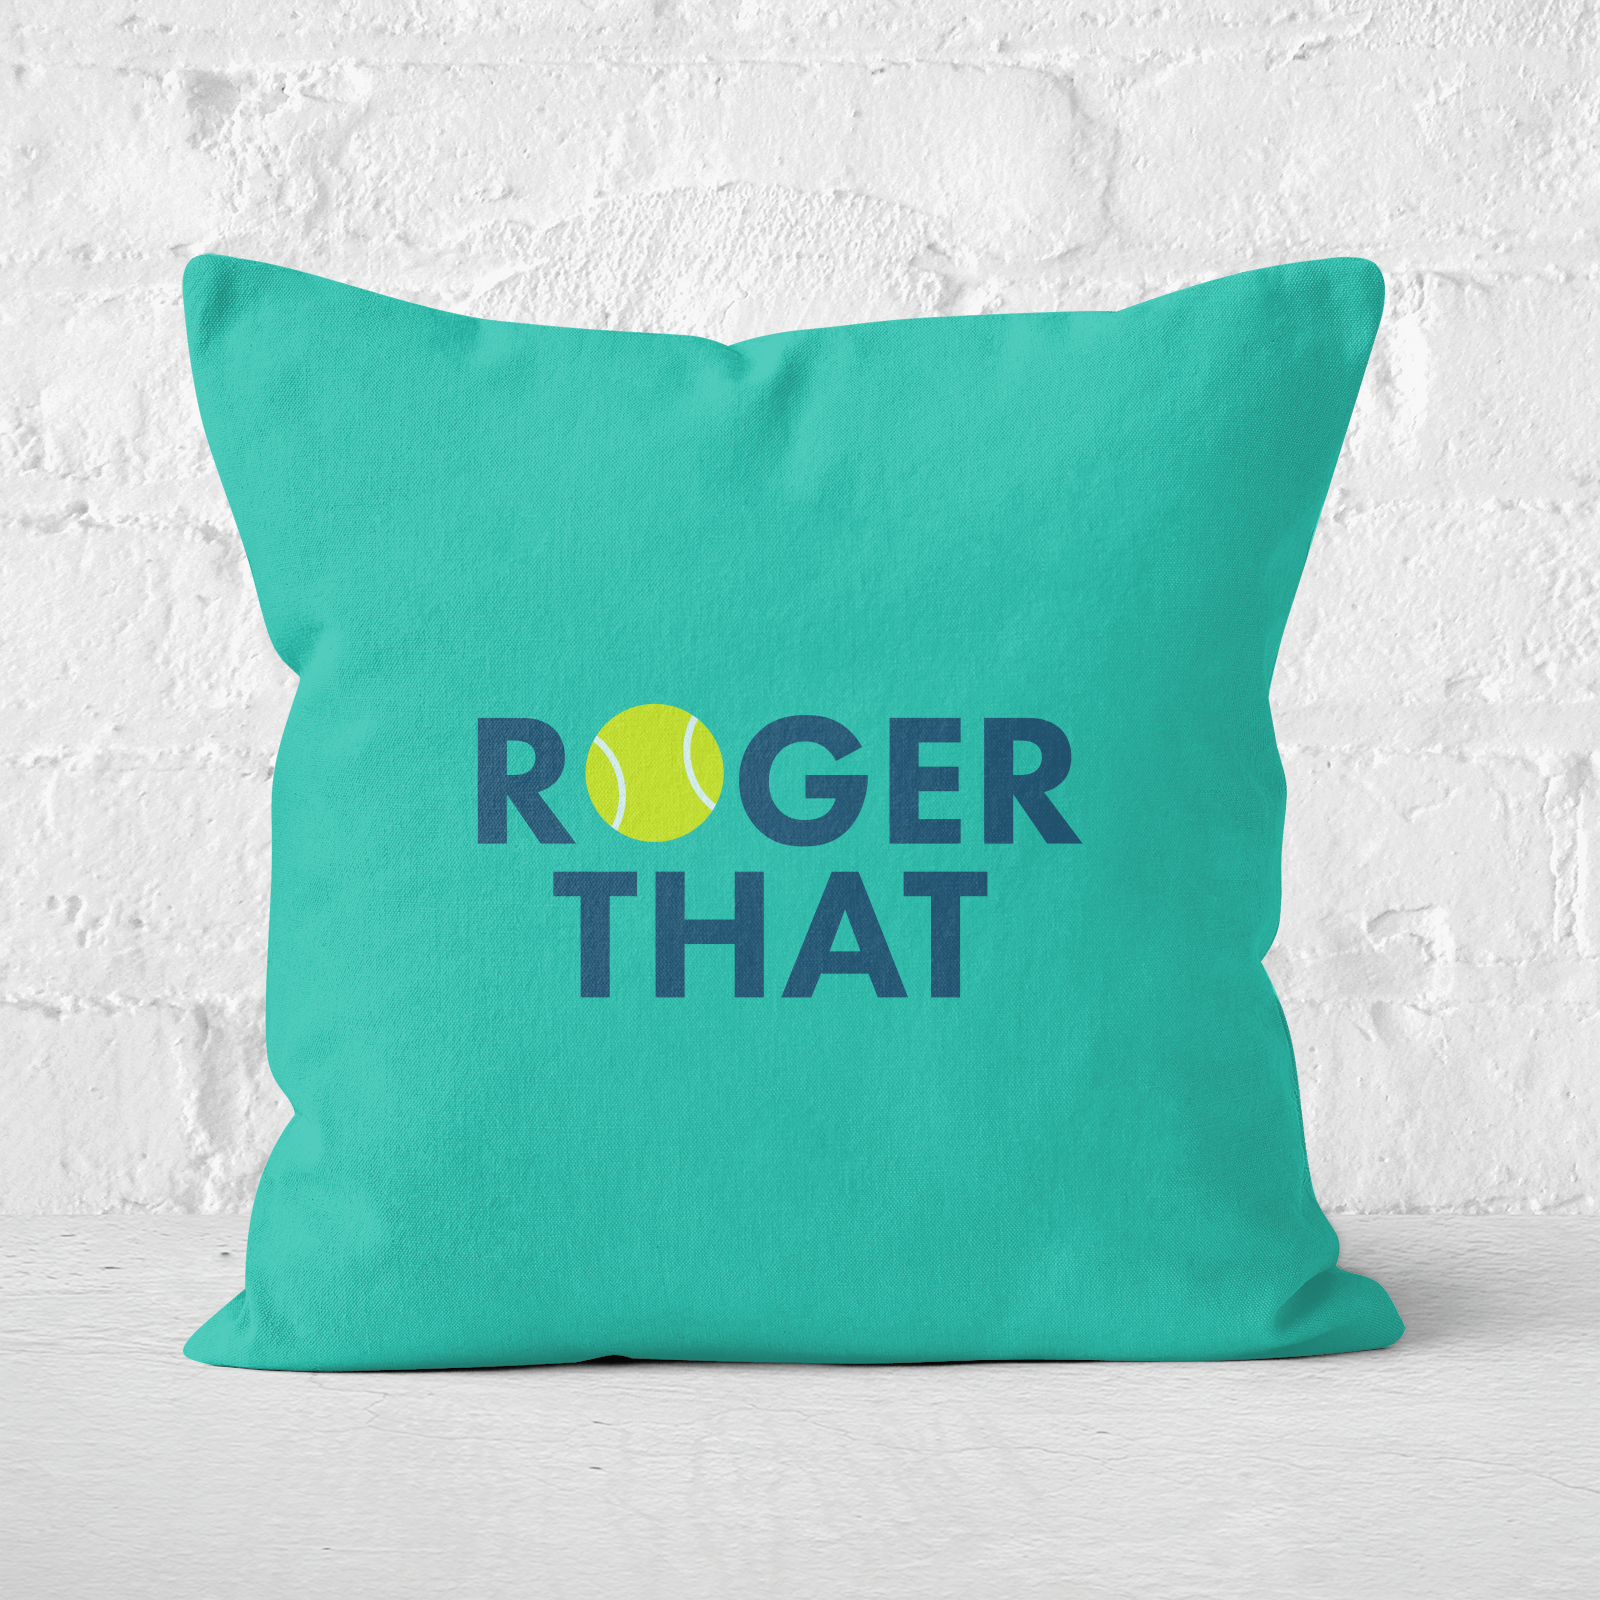 Roger That Square Cushion   50x50cm   Soft Touch